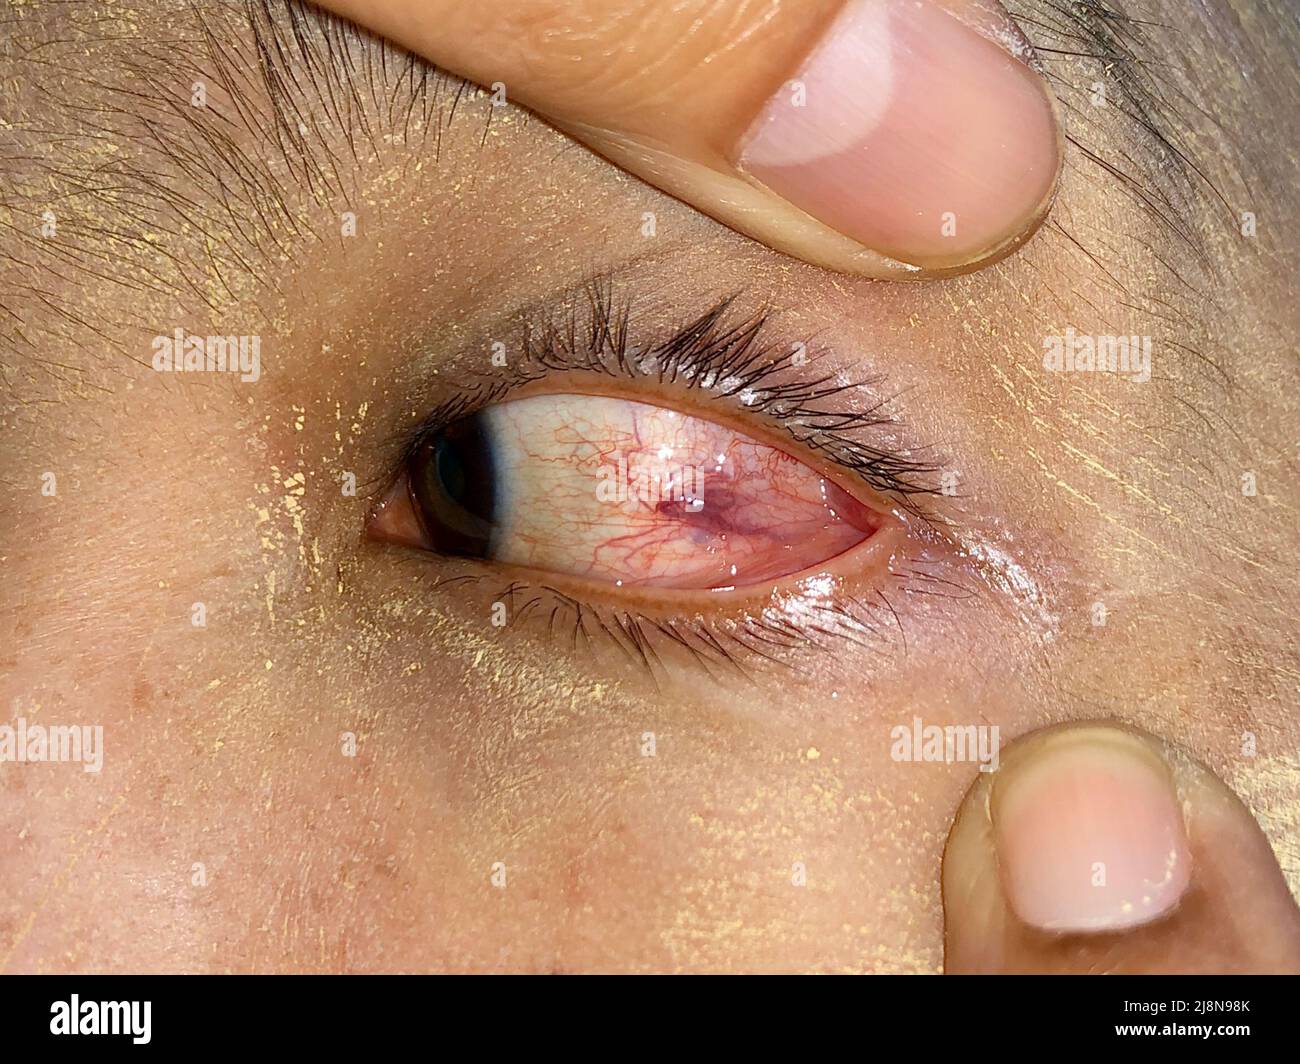 Ocular larva migrans or dilated vessels in left eye of Southeast Asian man. Stock Photo